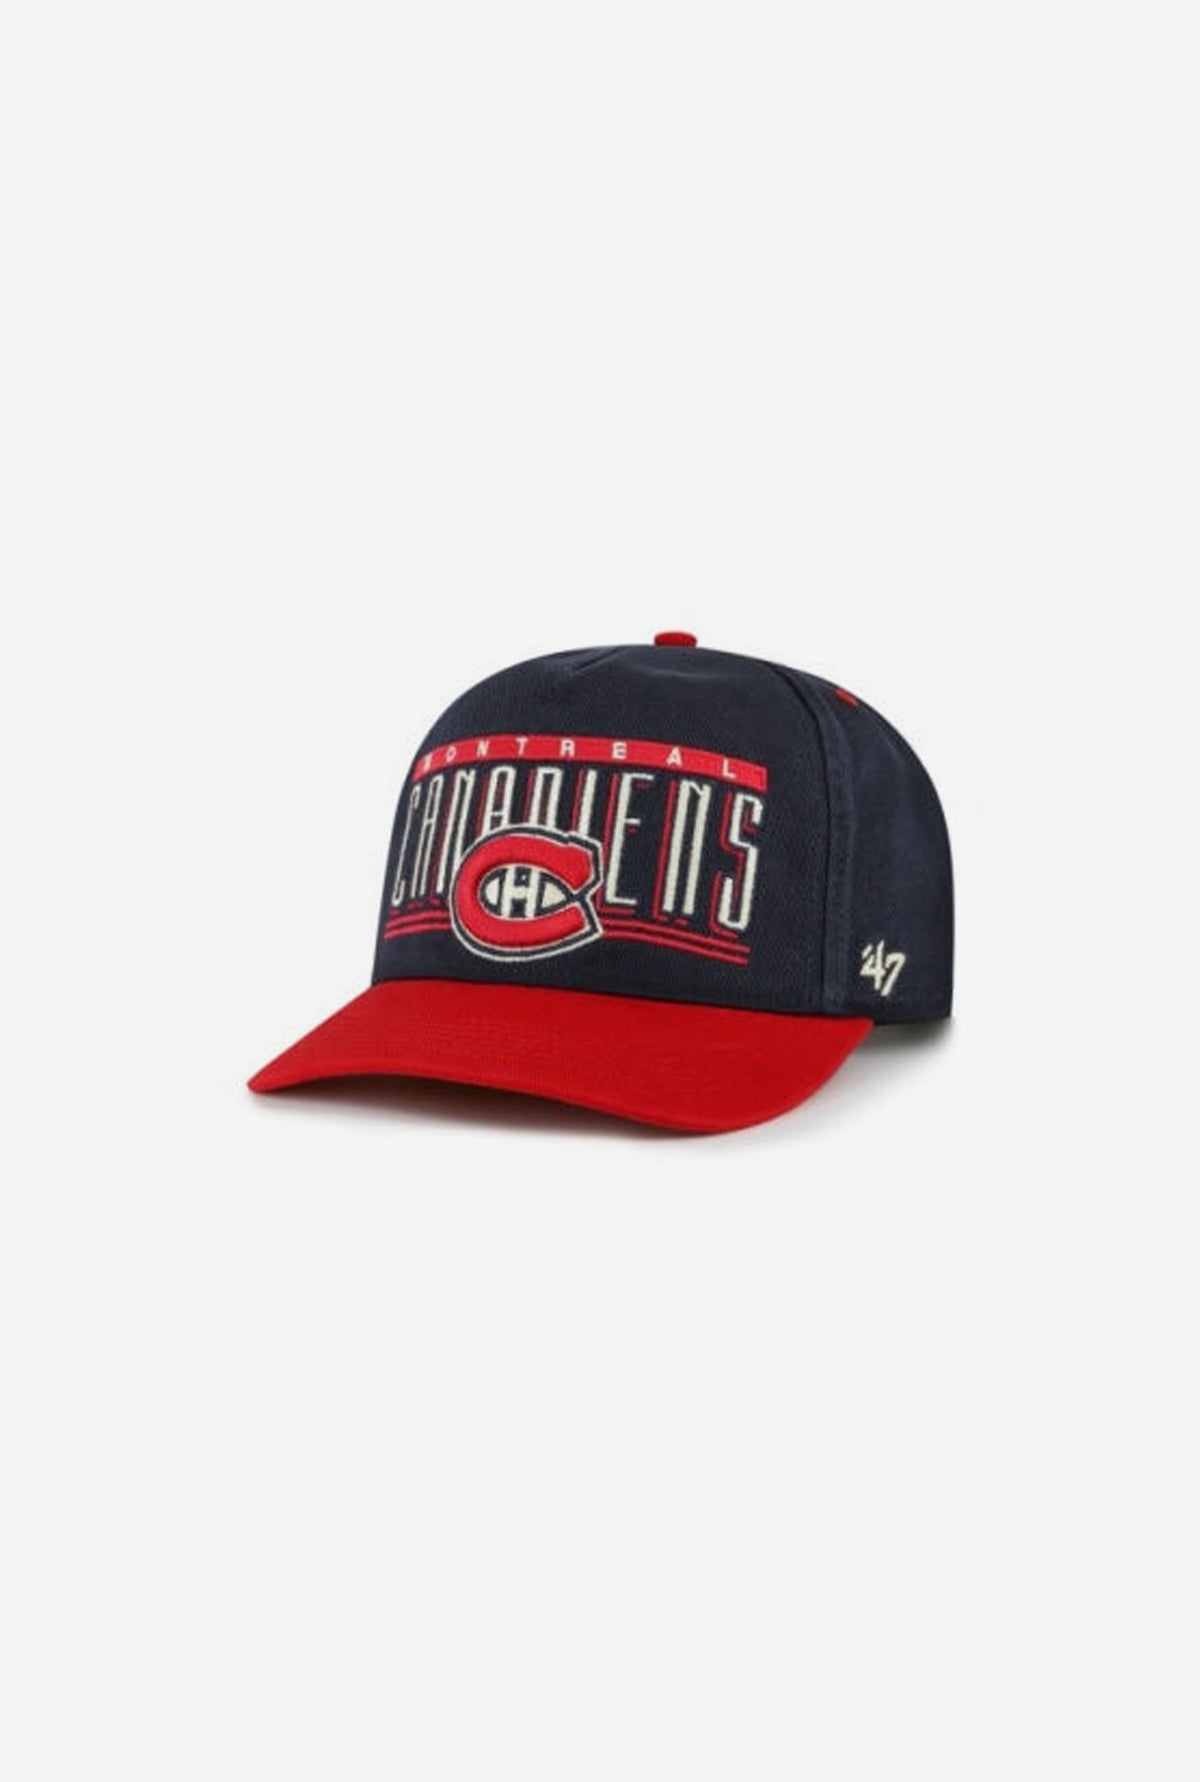 Montreal Canadiens Double Header Baseline Hitch Hat